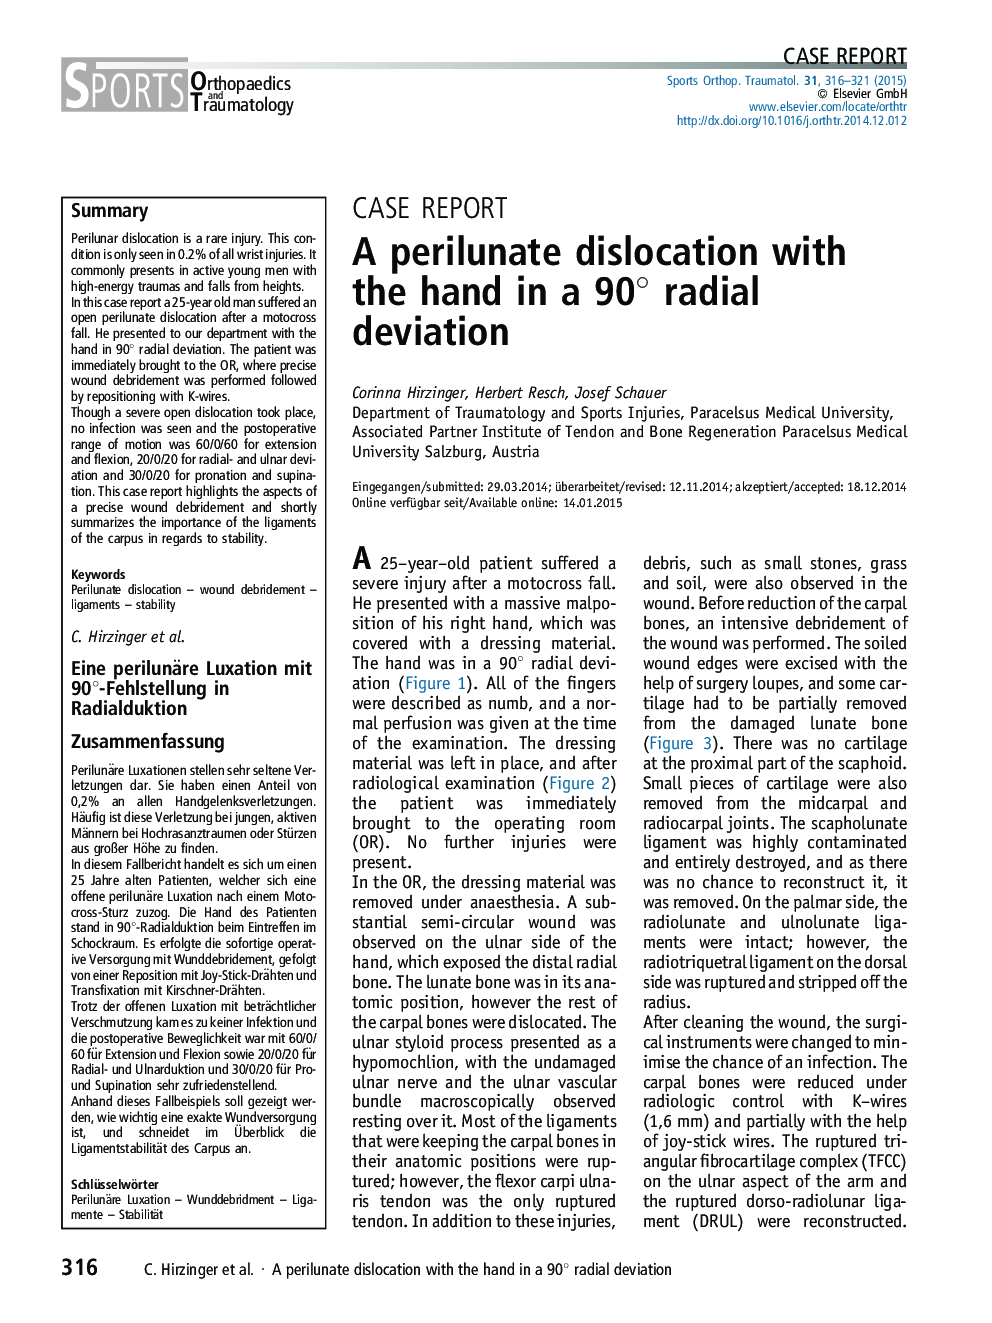 A perilunate dislocation with the hand in a 90Â° radial deviation